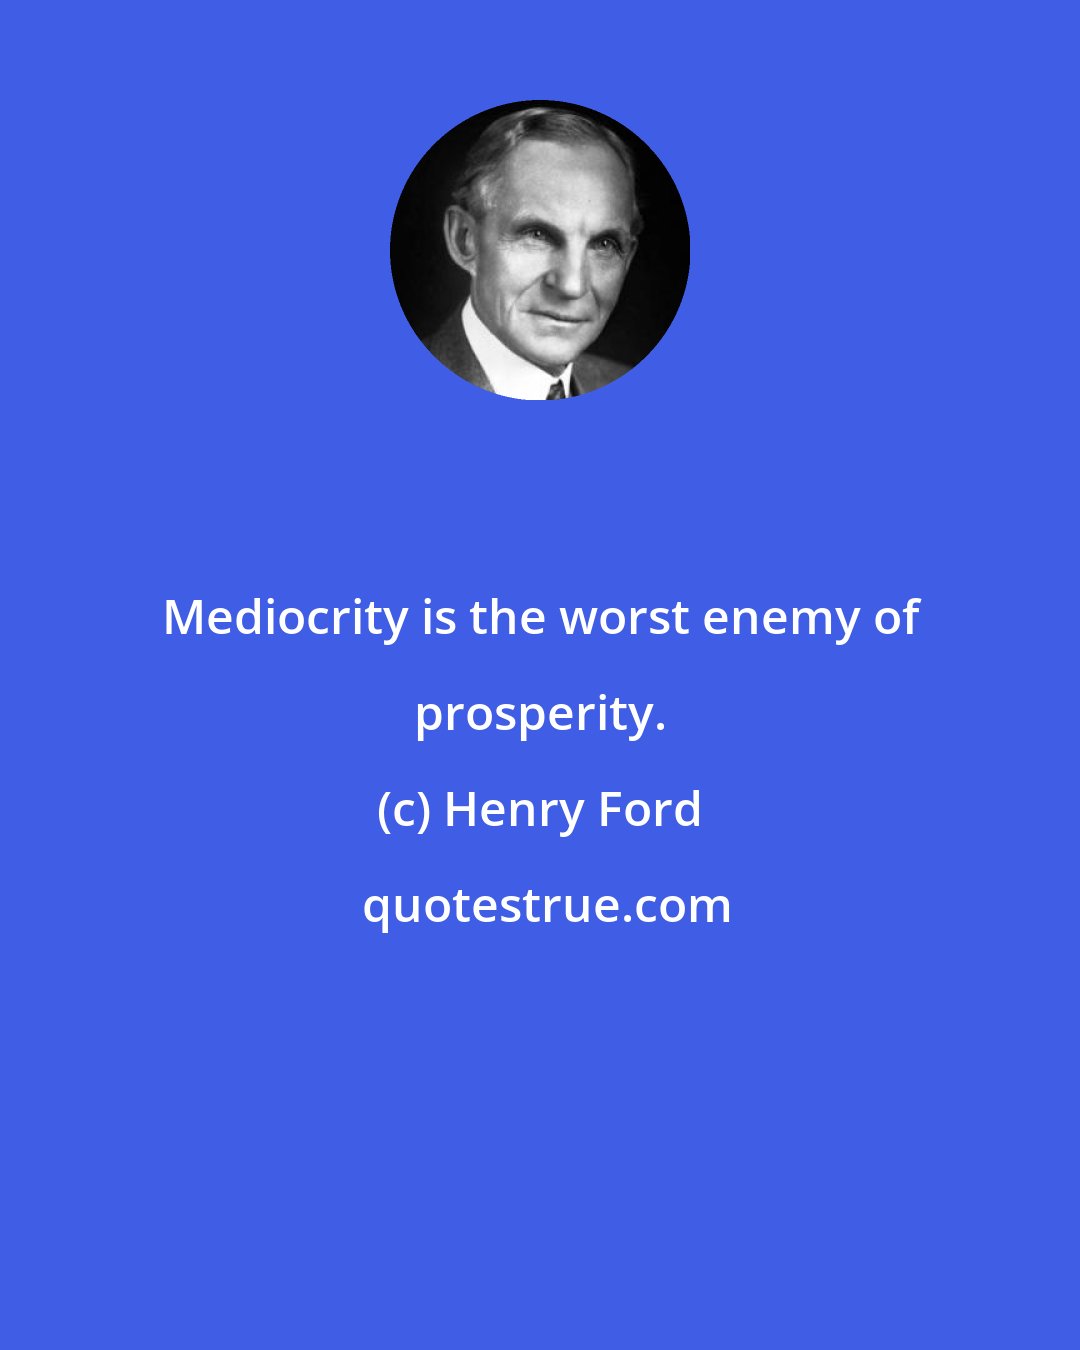 Henry Ford: Mediocrity is the worst enemy of prosperity.